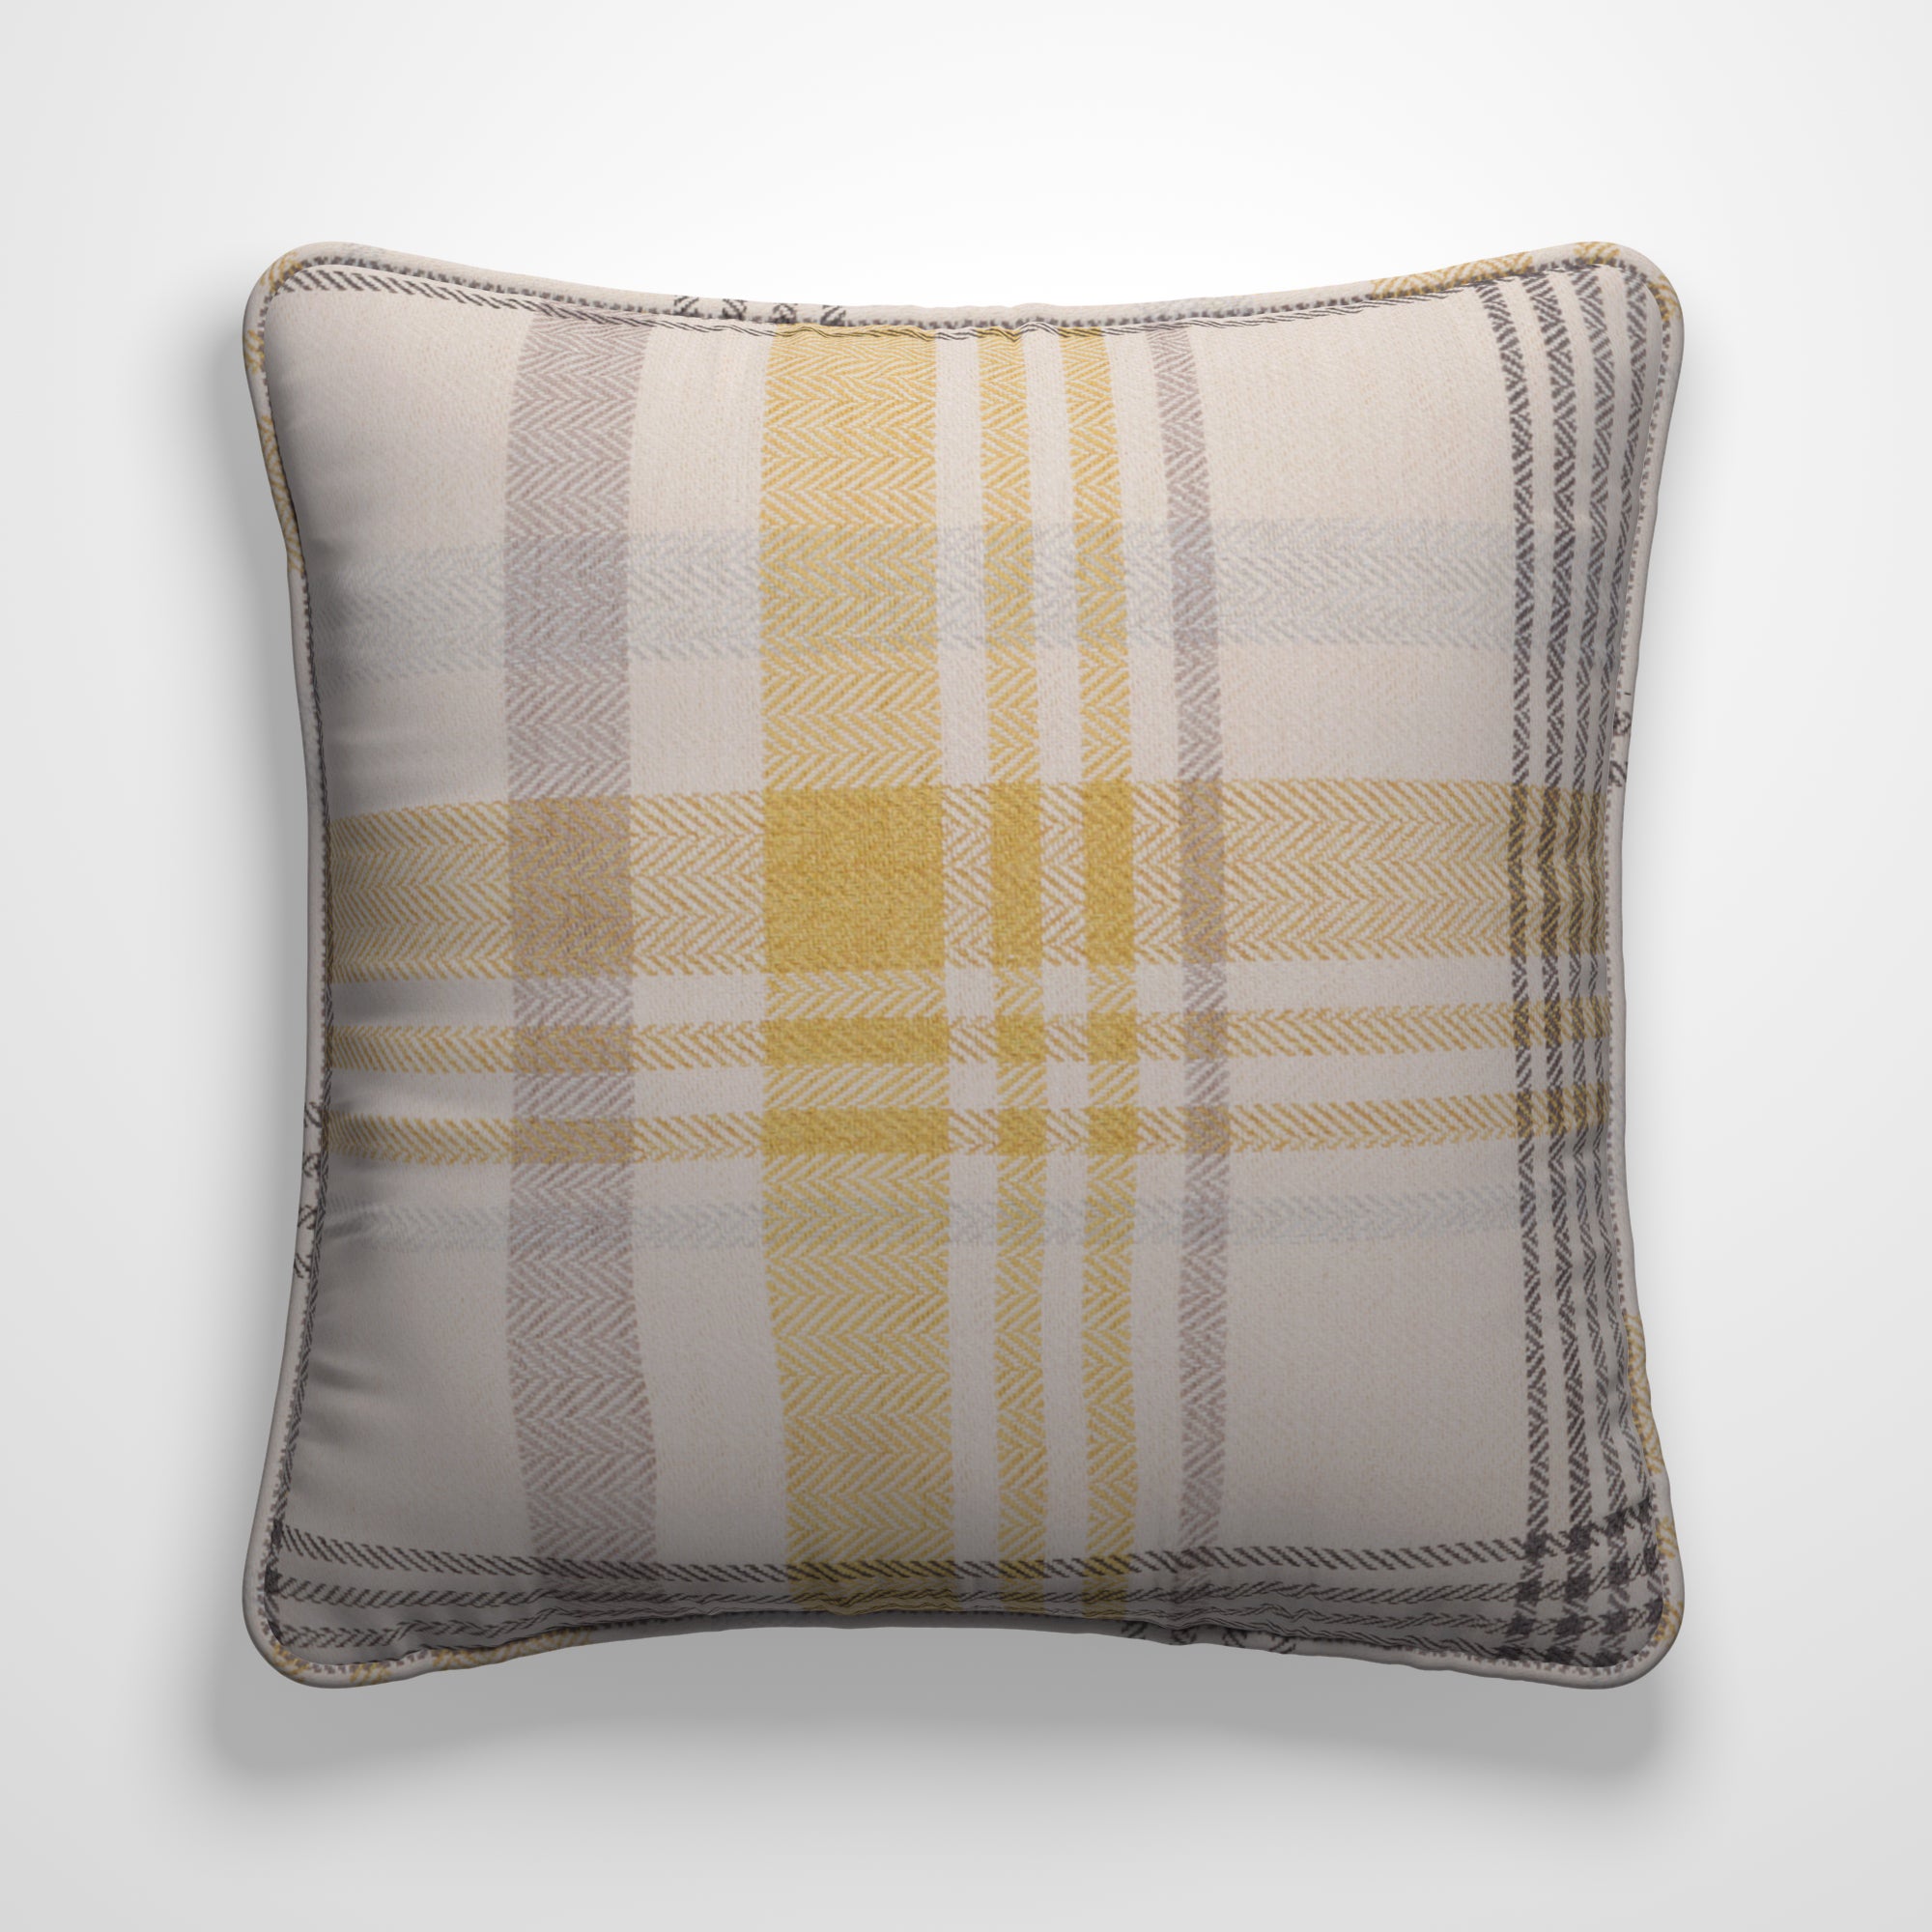 Melrose Made to Order Cushion Cover Melrose Ochre Check